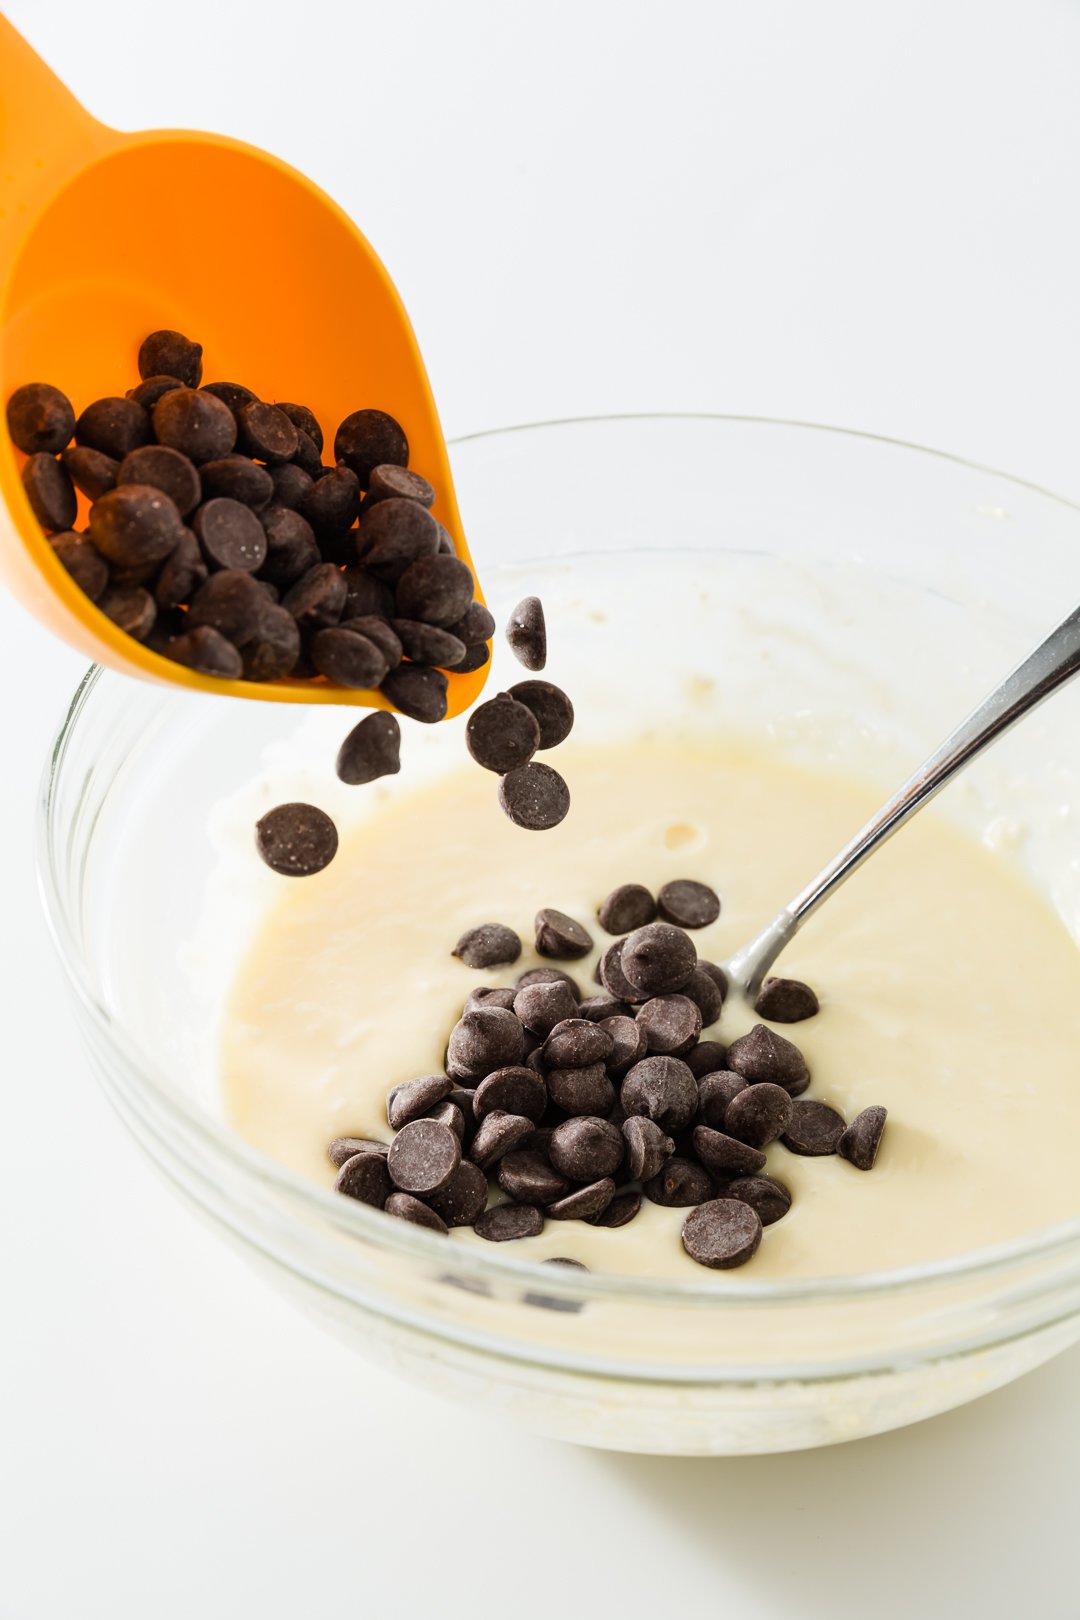 Chocolate chips being added to cheesecake topping